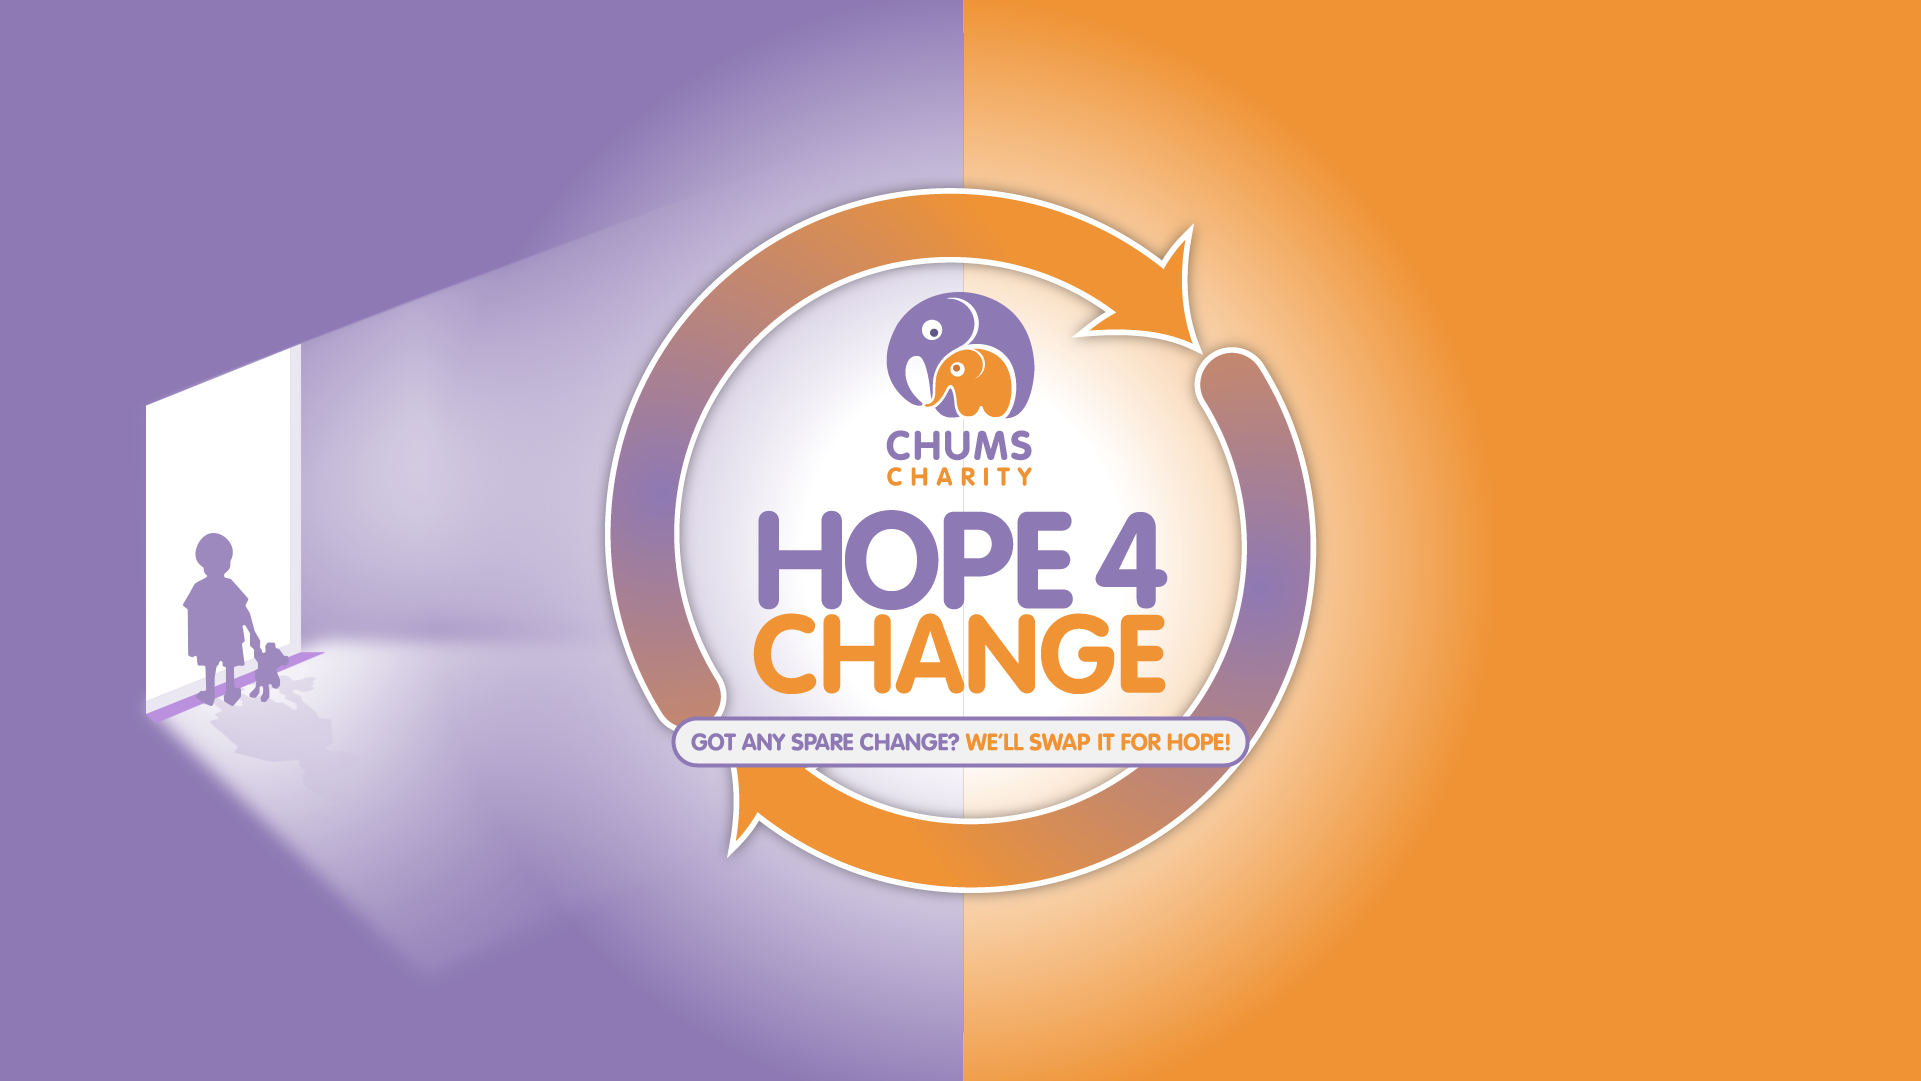 Chums Charity Hope 4 Change Campaign